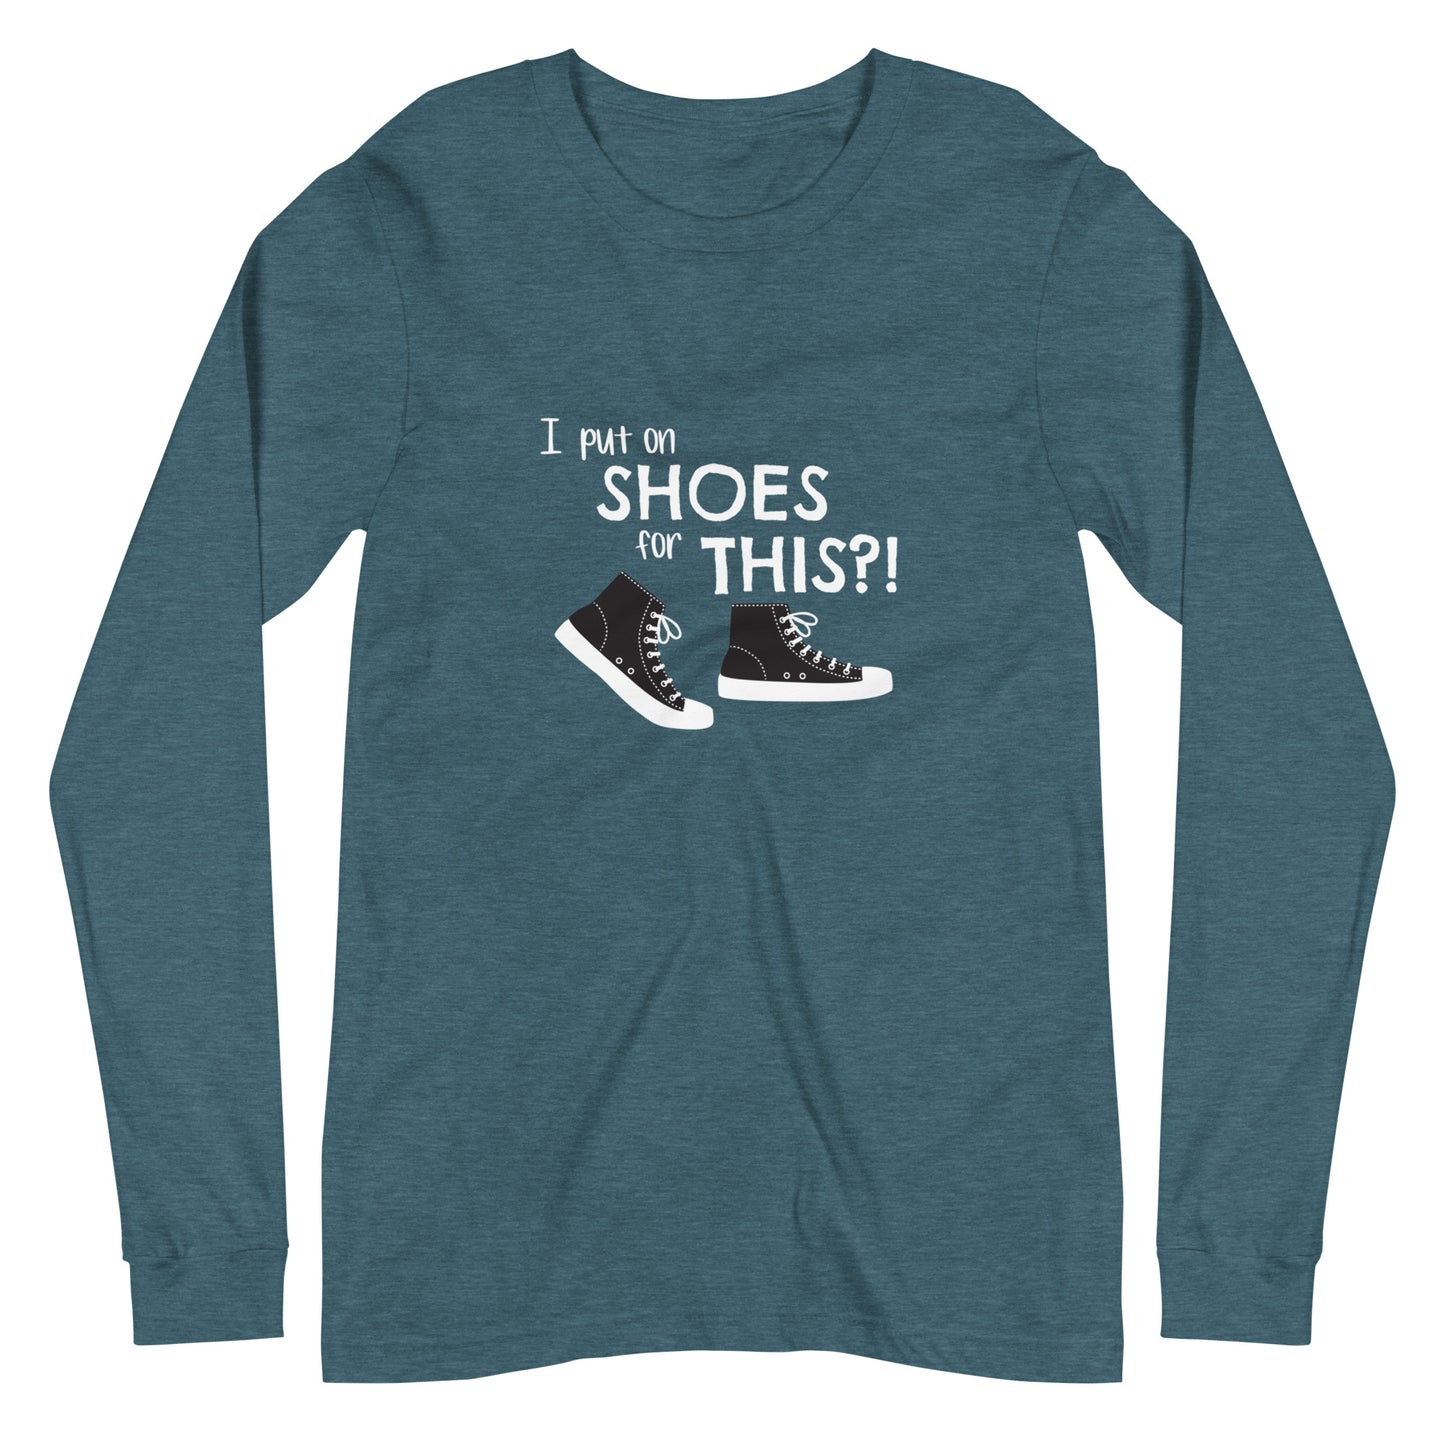 Heather Deep Teal long-sleeve t-shirt with graphic of black and white canvas "chuck" sneakers and text: "I put on SHOES for THIS?!"